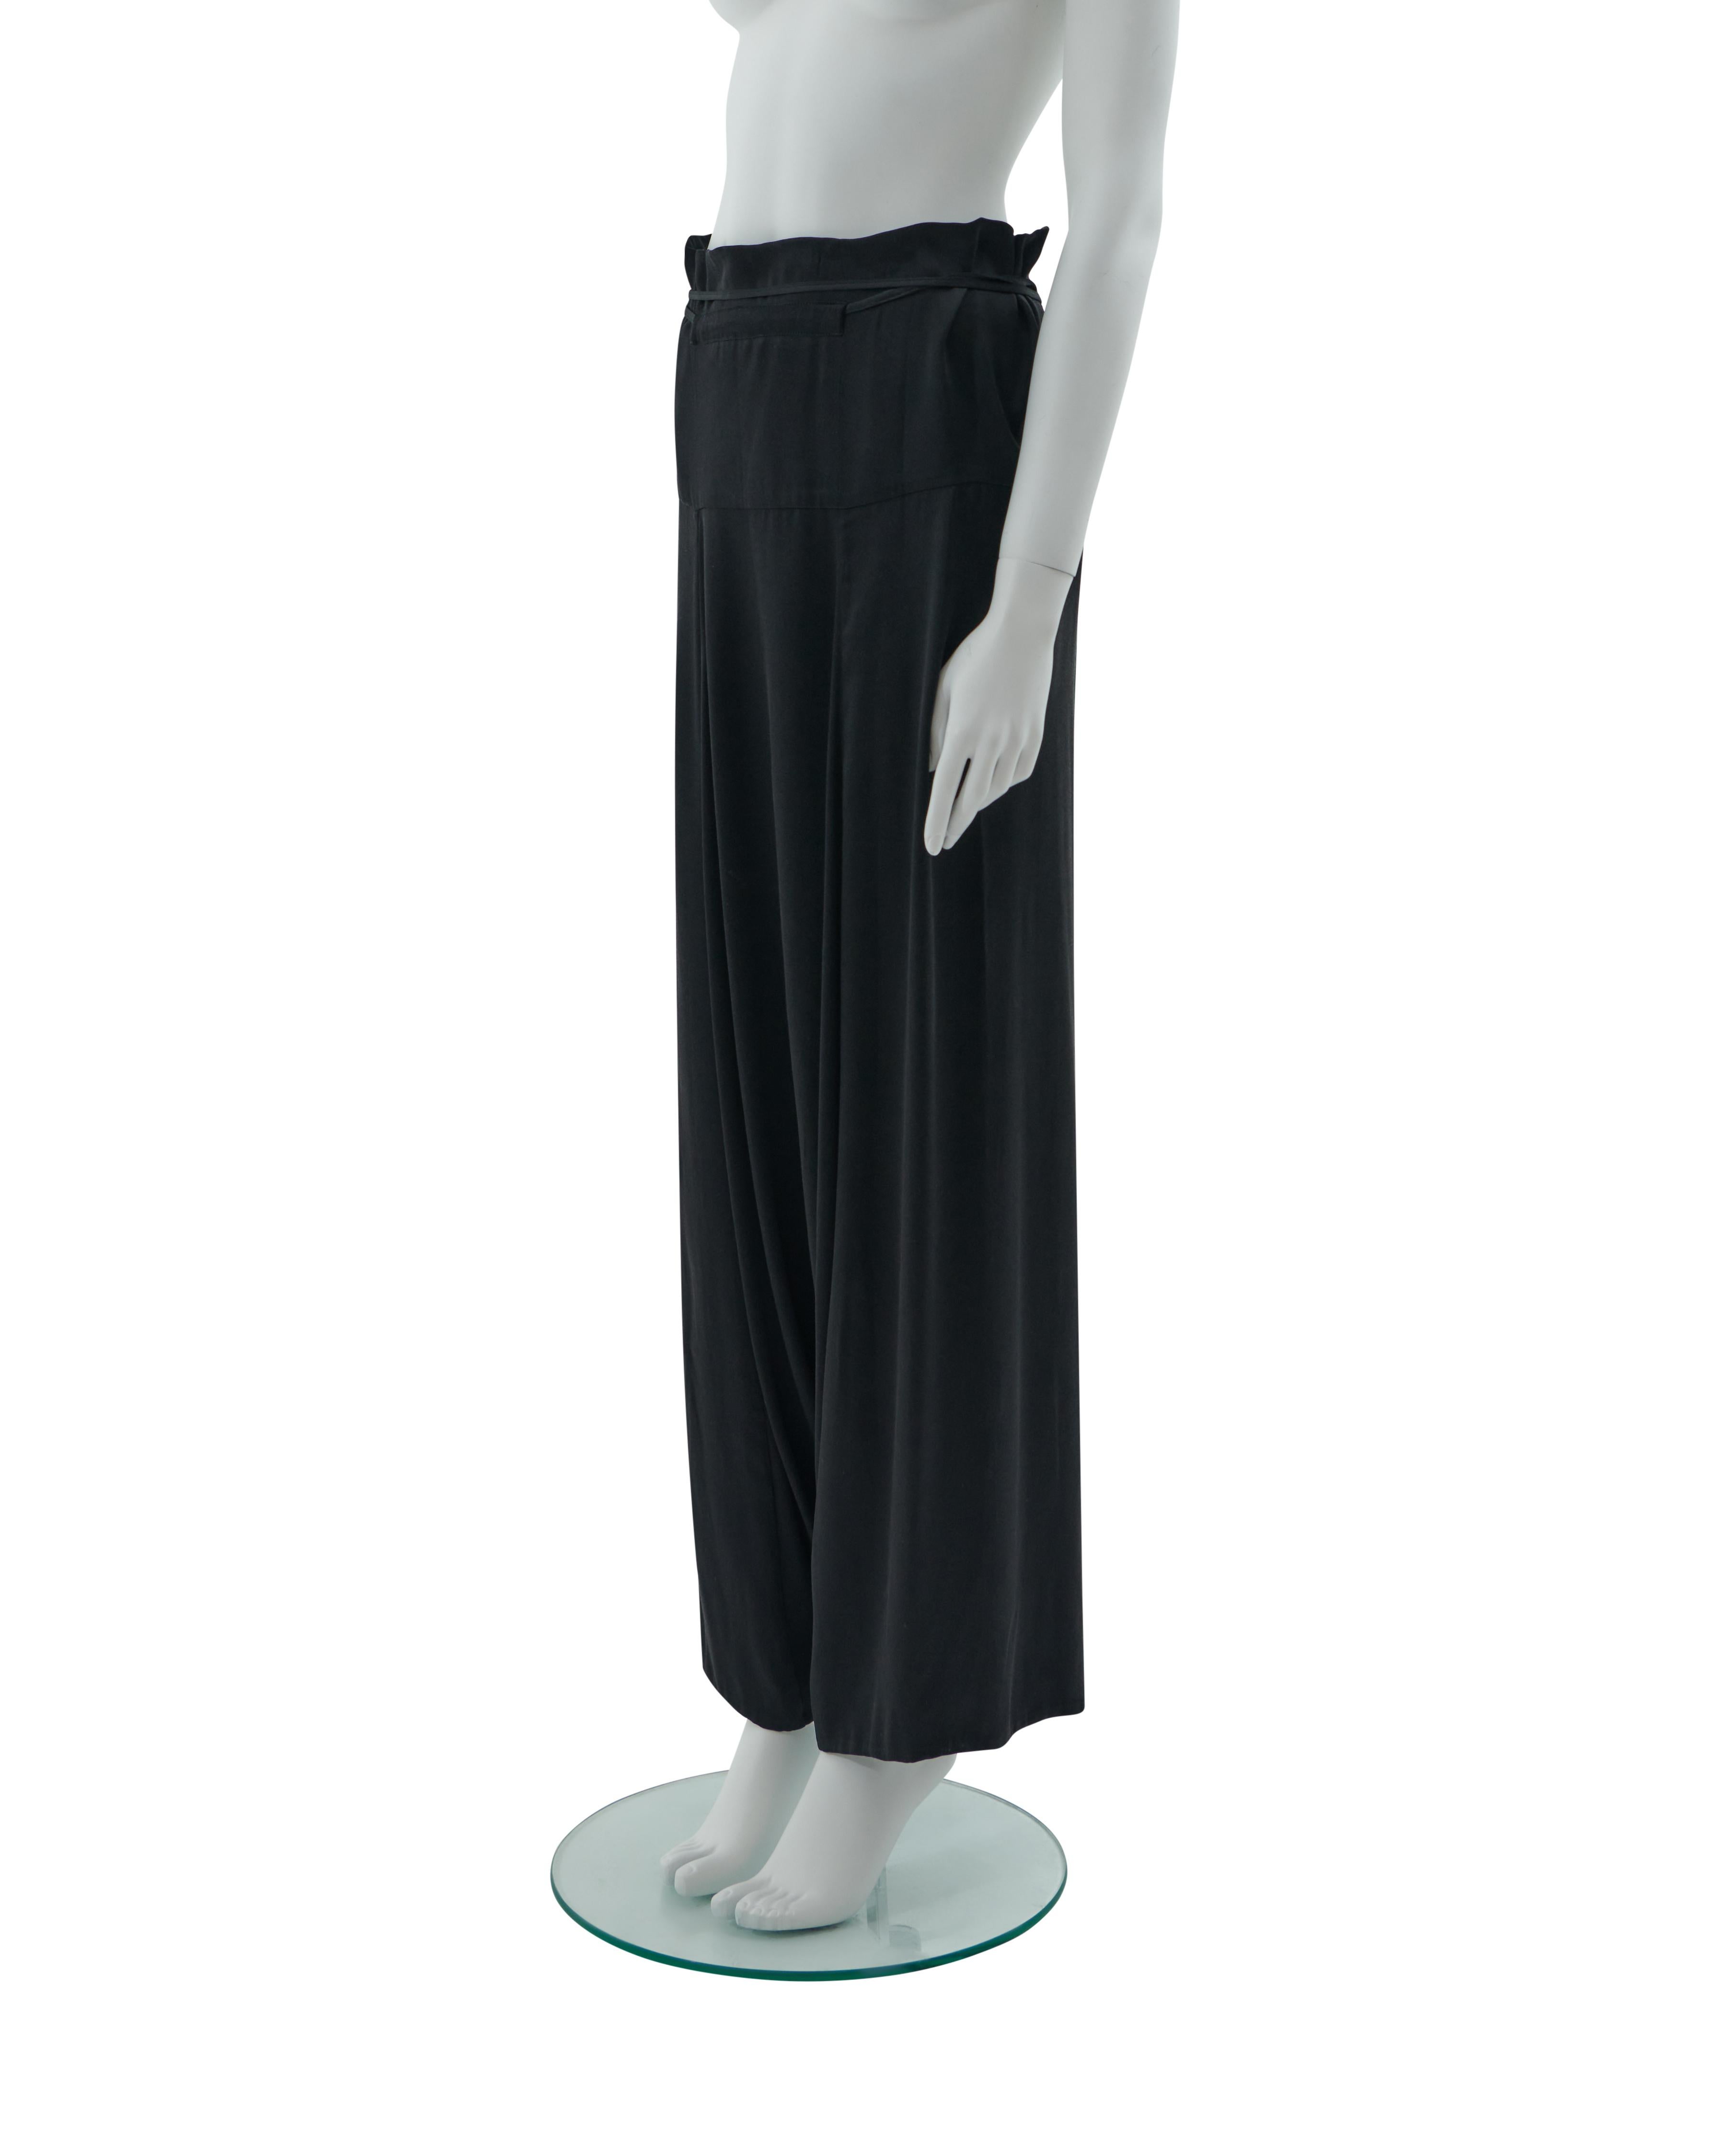 - Designed by Tom Ford
- Sold by Skof.Archive
- Runway look 36
- Black silk harem pants
- Adjustable tie at the waist
- Oversize fit 
- Spring-Summer 2002
- Made in Italy

Condition: Excellent

Composition: 100% Silk

Size: FR 34 - EN 38 - UK 6 - US